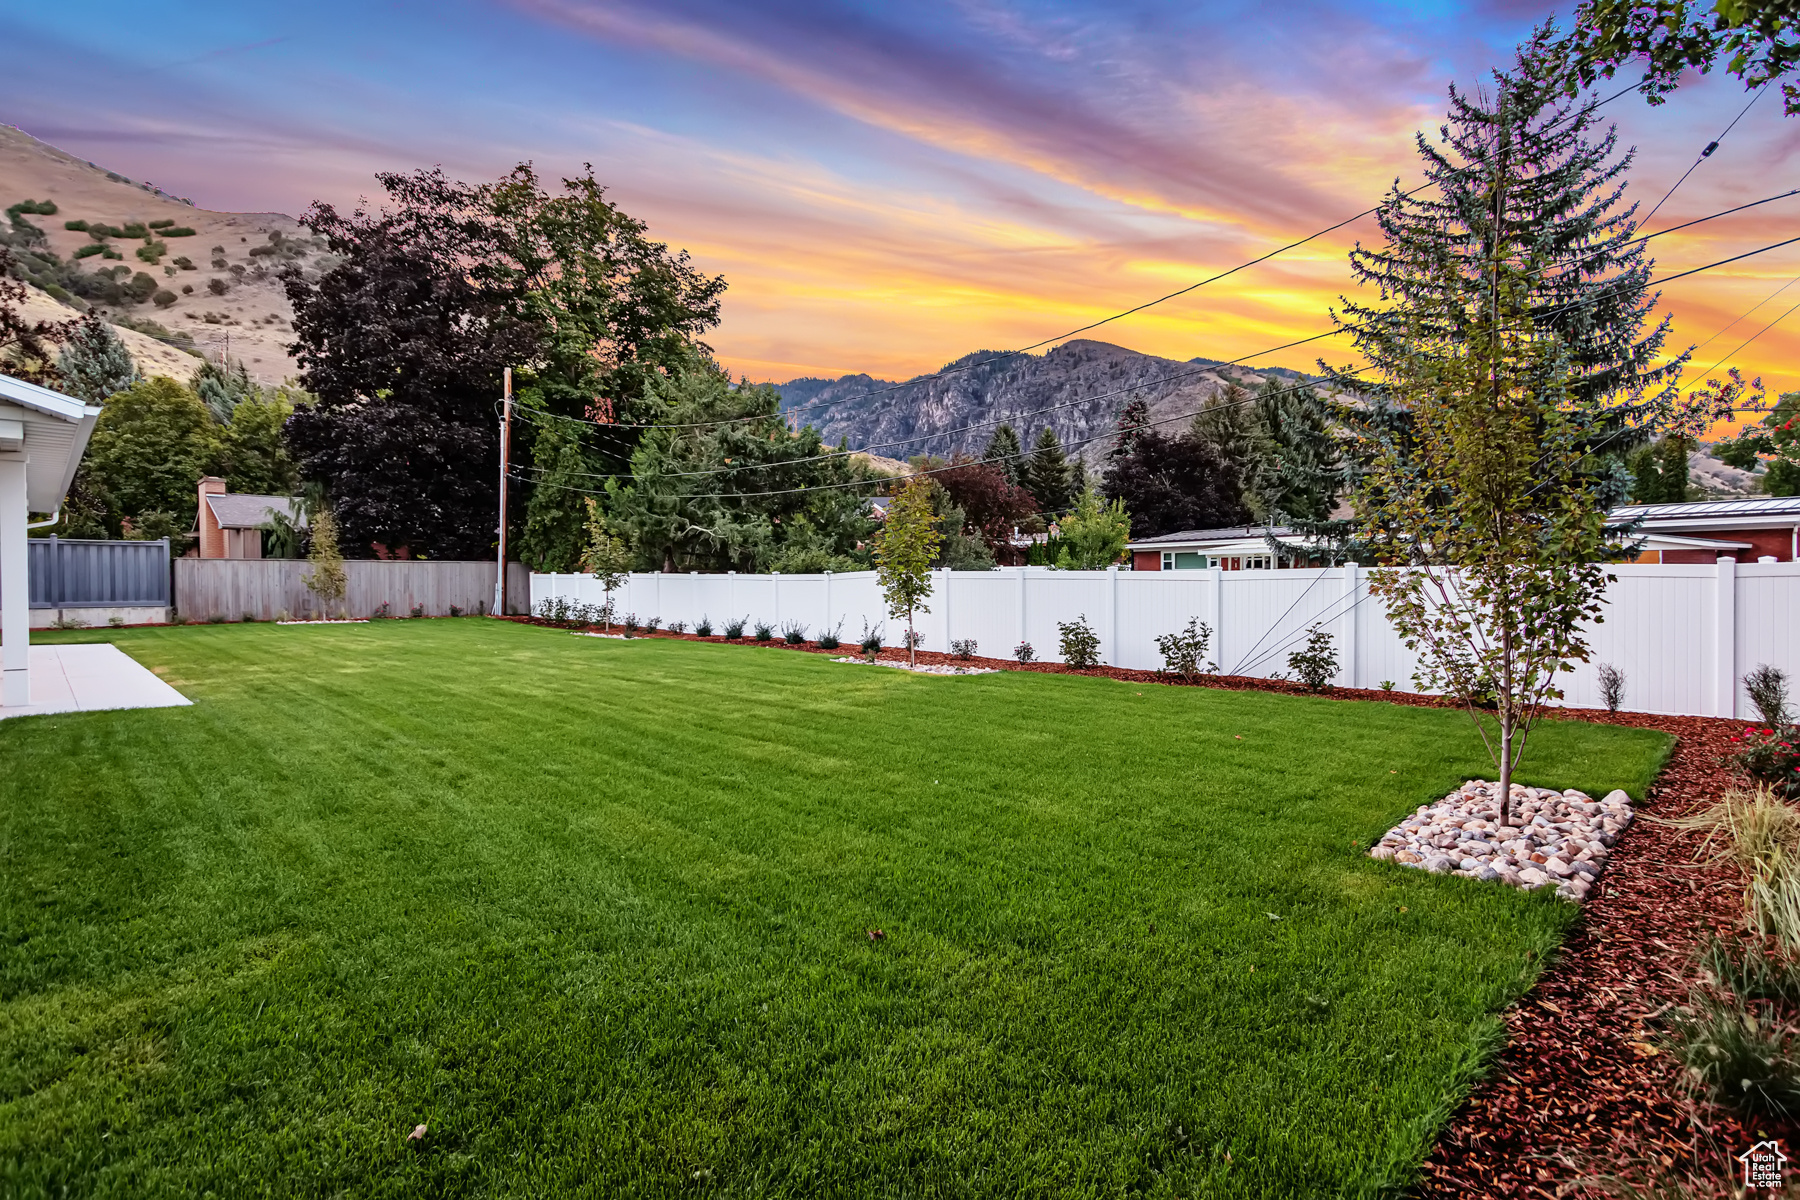 1774 E COUNTRY CLUB DR N, Logan, Utah 84321, 4 Bedrooms Bedrooms, 14 Rooms Rooms,1 BathroomBathrooms,Residential,For sale,COUNTRY CLUB DR,1991281